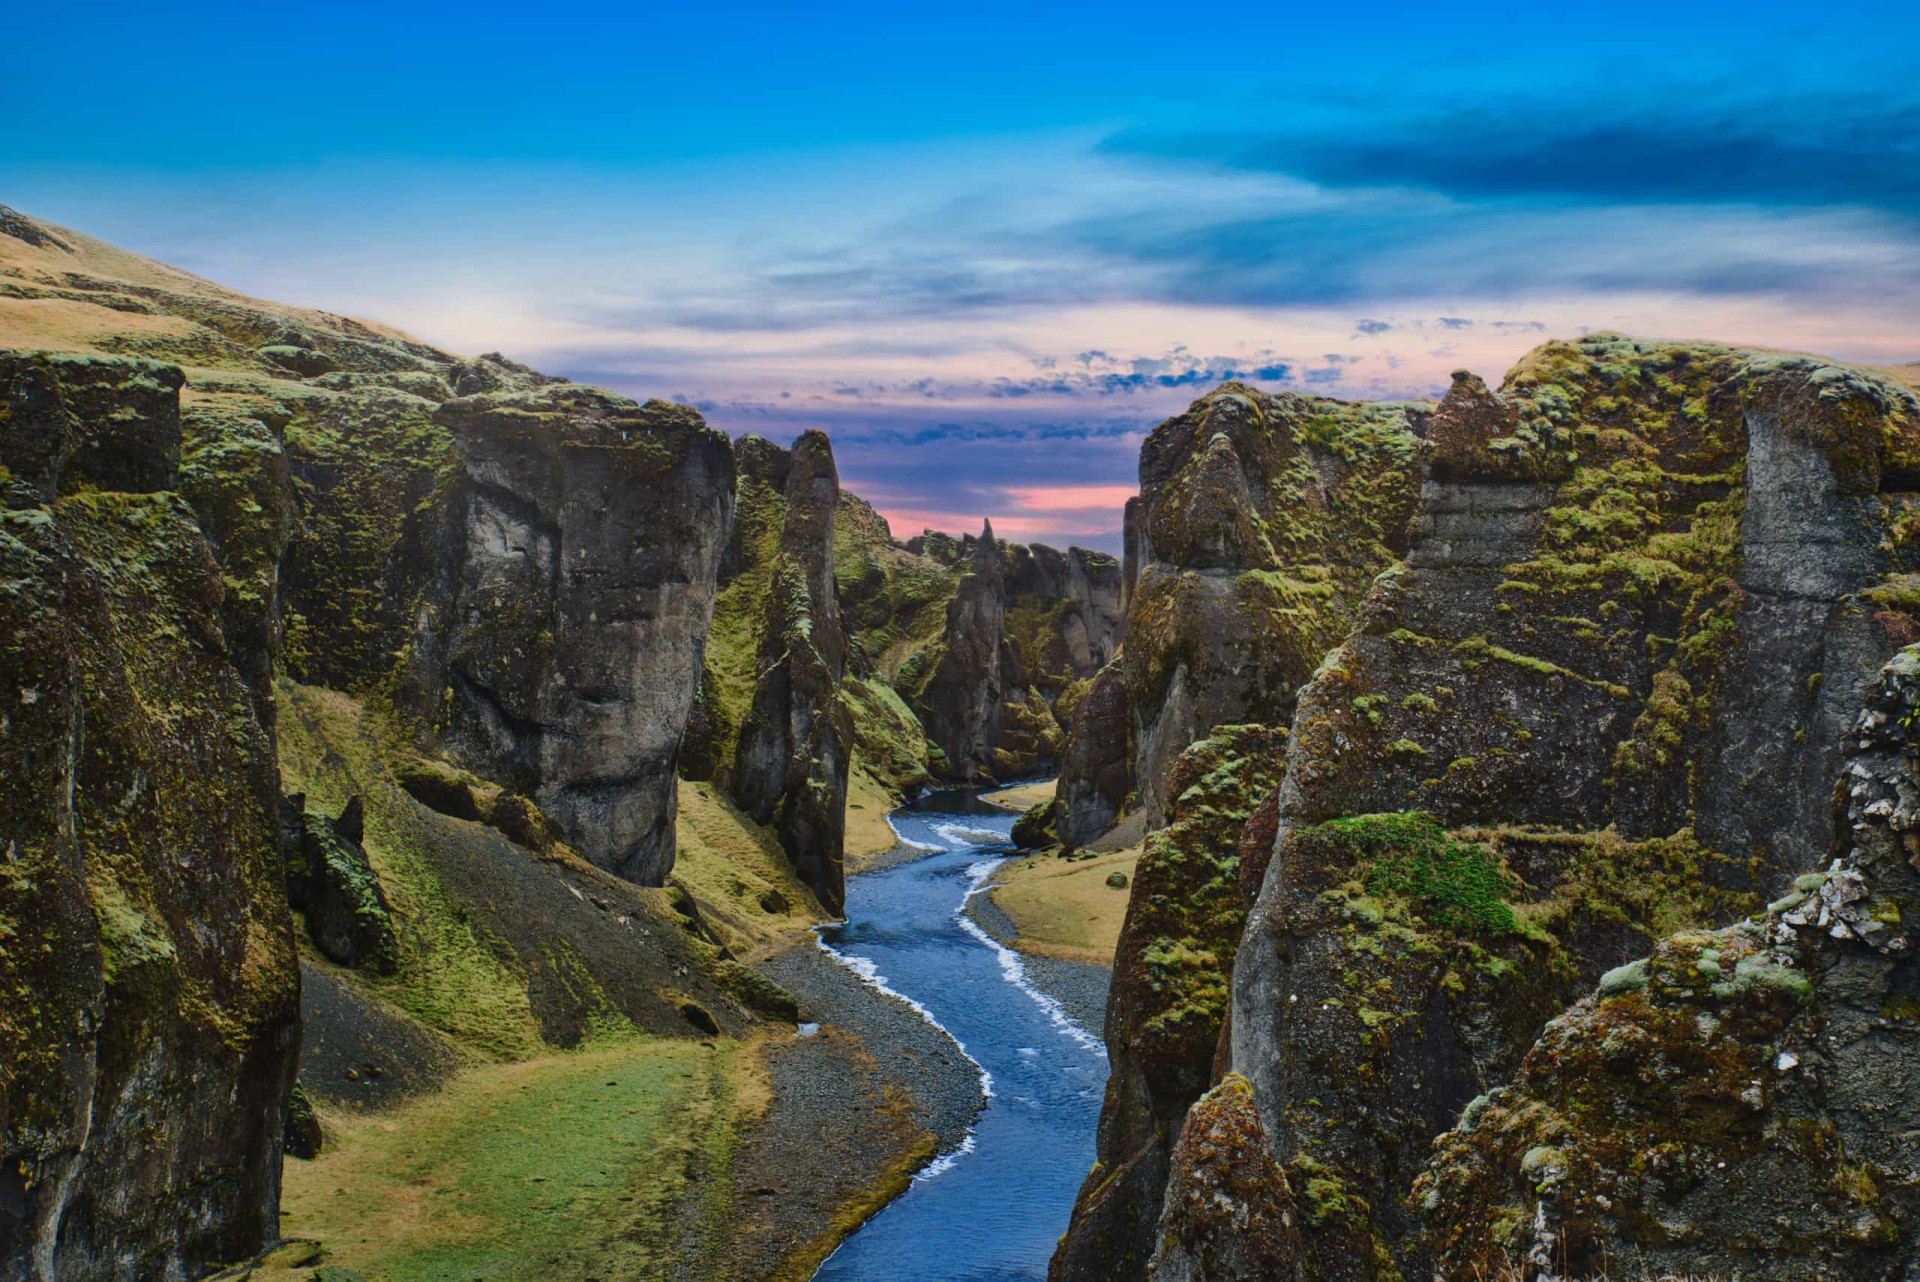 <p>'Game of Thrones' and a Justin Bieber music video have been blamed for the influx of tourists that descended upon Fjaðrárgljúfur Canyon in droves, causing environmental damage and prompting the implementation of a visitor ban to the site.</p><p><a href="https://www.msn.com/en-my/community/channel/vid-7xx8mnucu55yw63we9va2gwr7uihbxwc68fxqp25x6tg4ftibpra?cvid=94631541bc0f4f89bfd59158d696ad7e">Follow us and access great exclusive content every day</a></p>